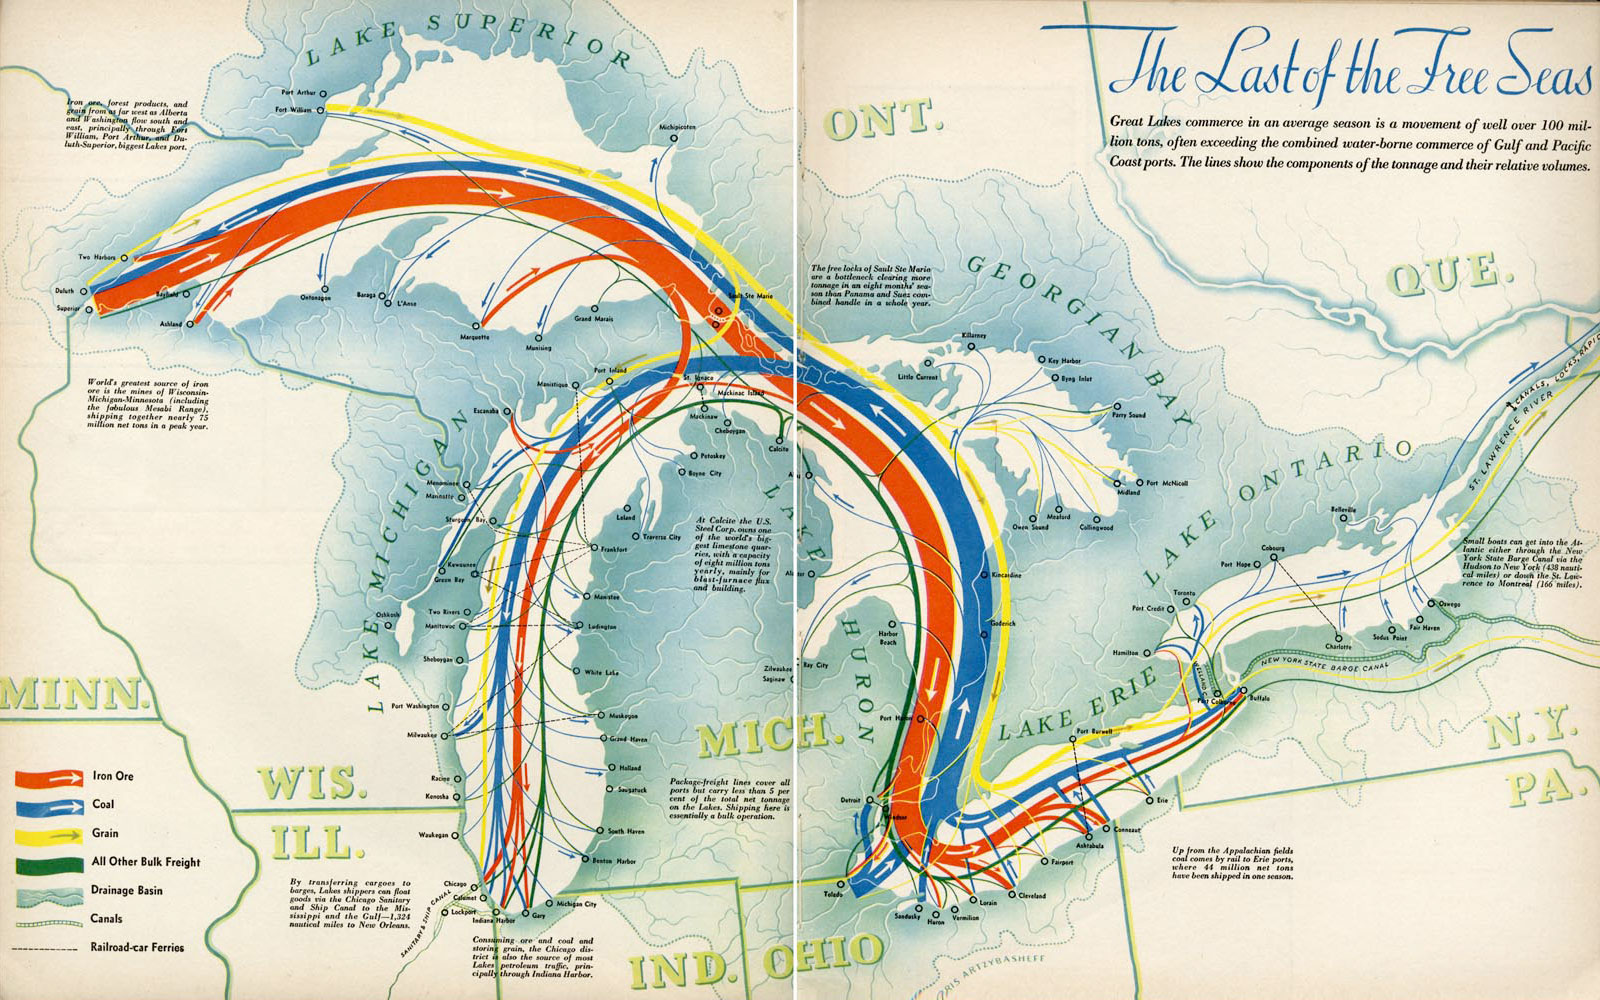 A 1940 map of commodities trade in the Great Lakes